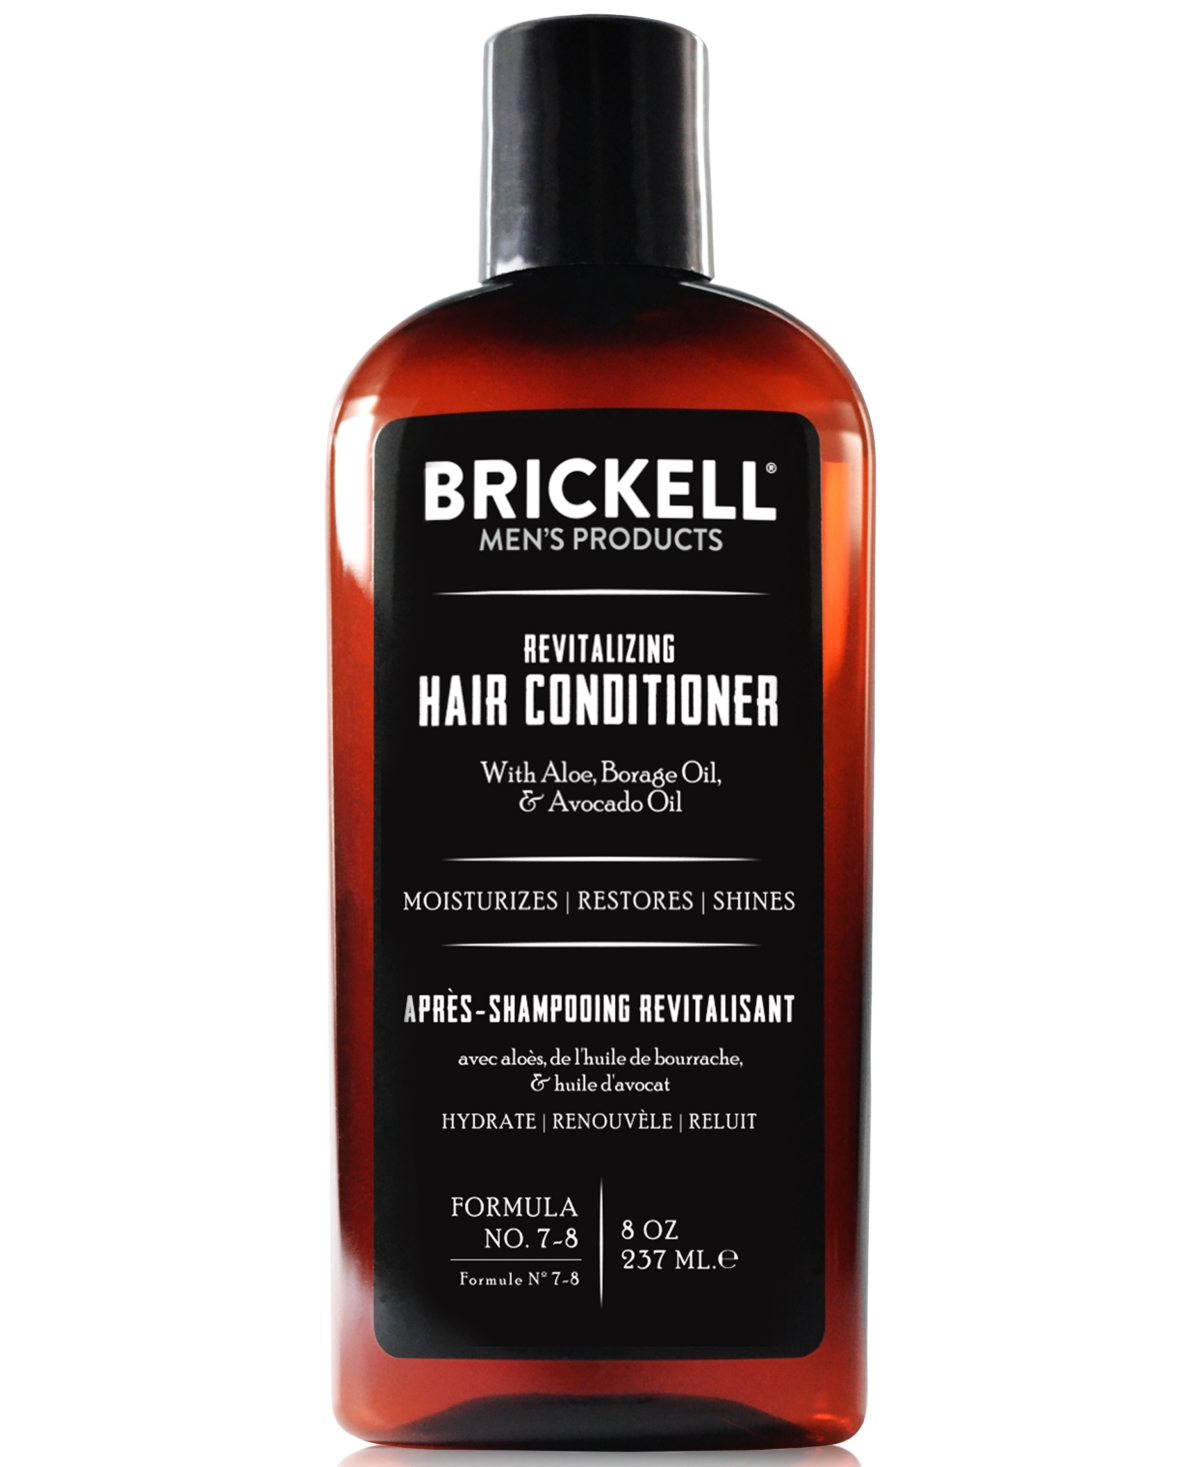 Brickell Mens Products Brickell Men's Products Revitalizing Hair Conditioner, 8 Oz.